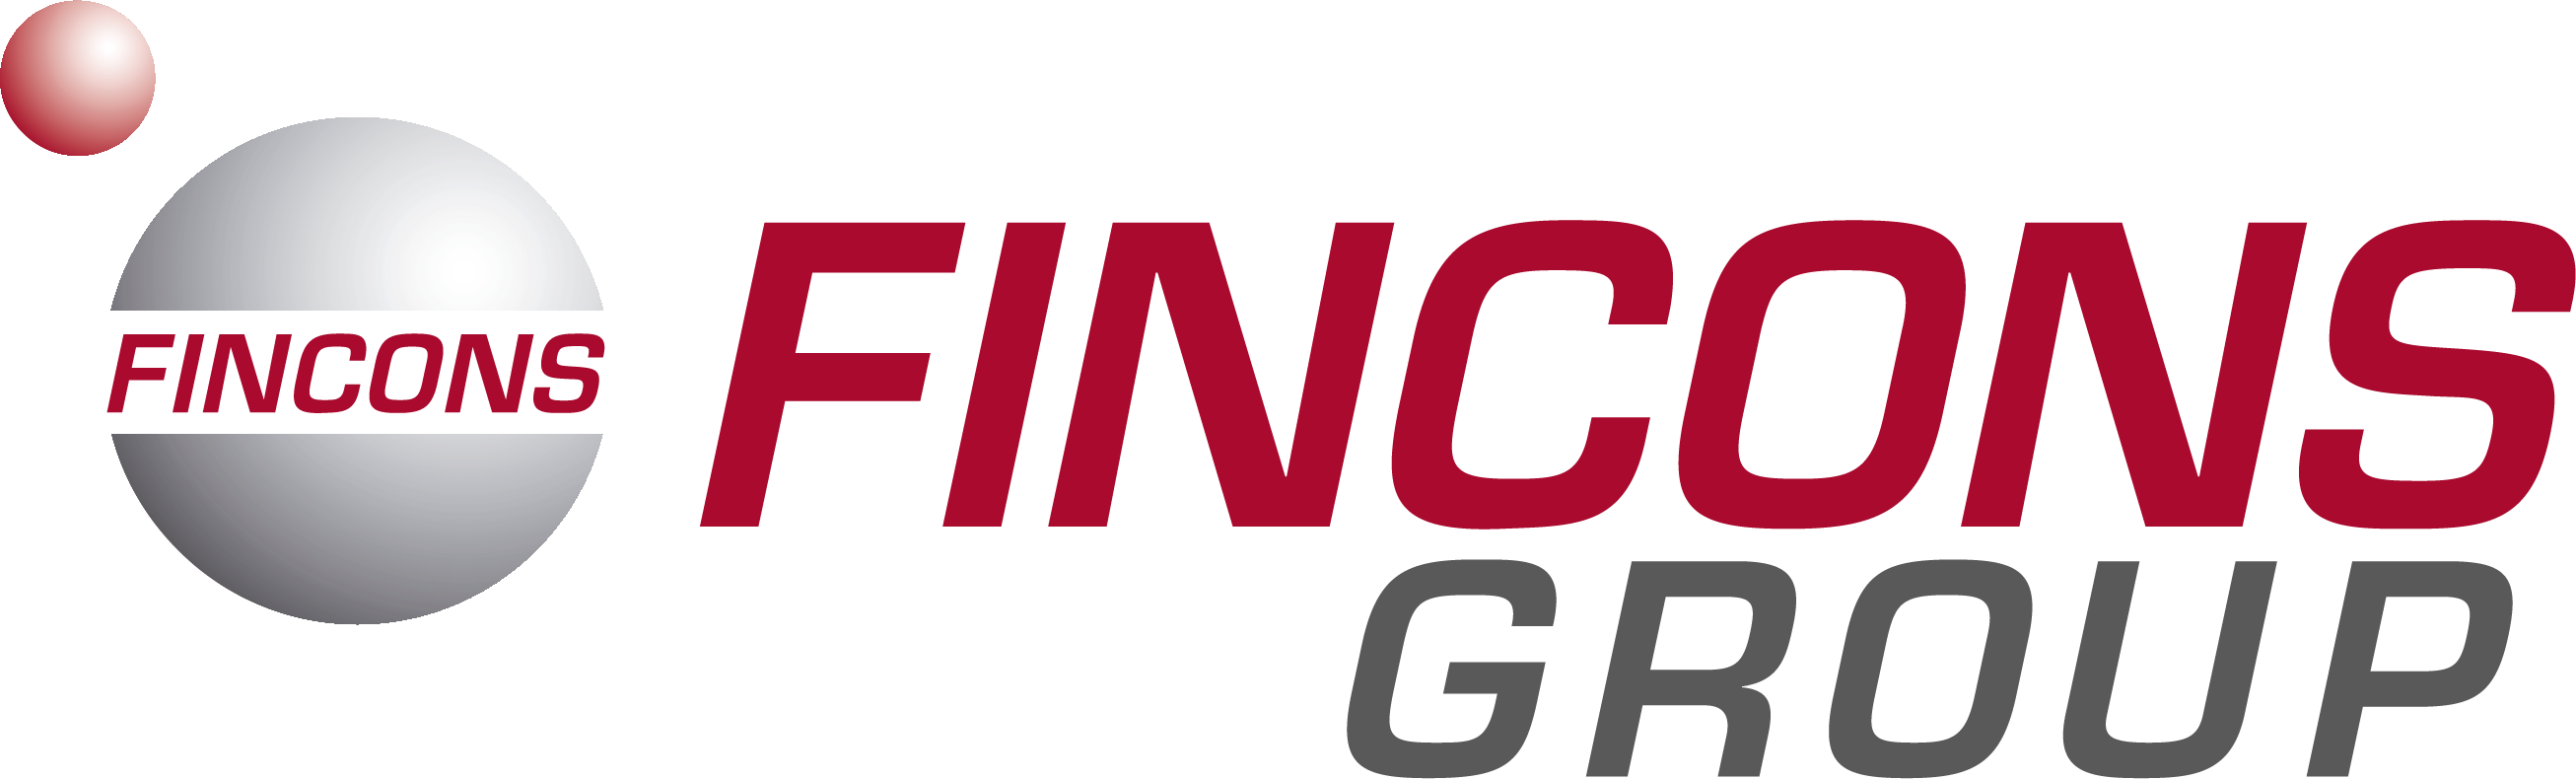 FINCONS-Group_logo-PNG (2)